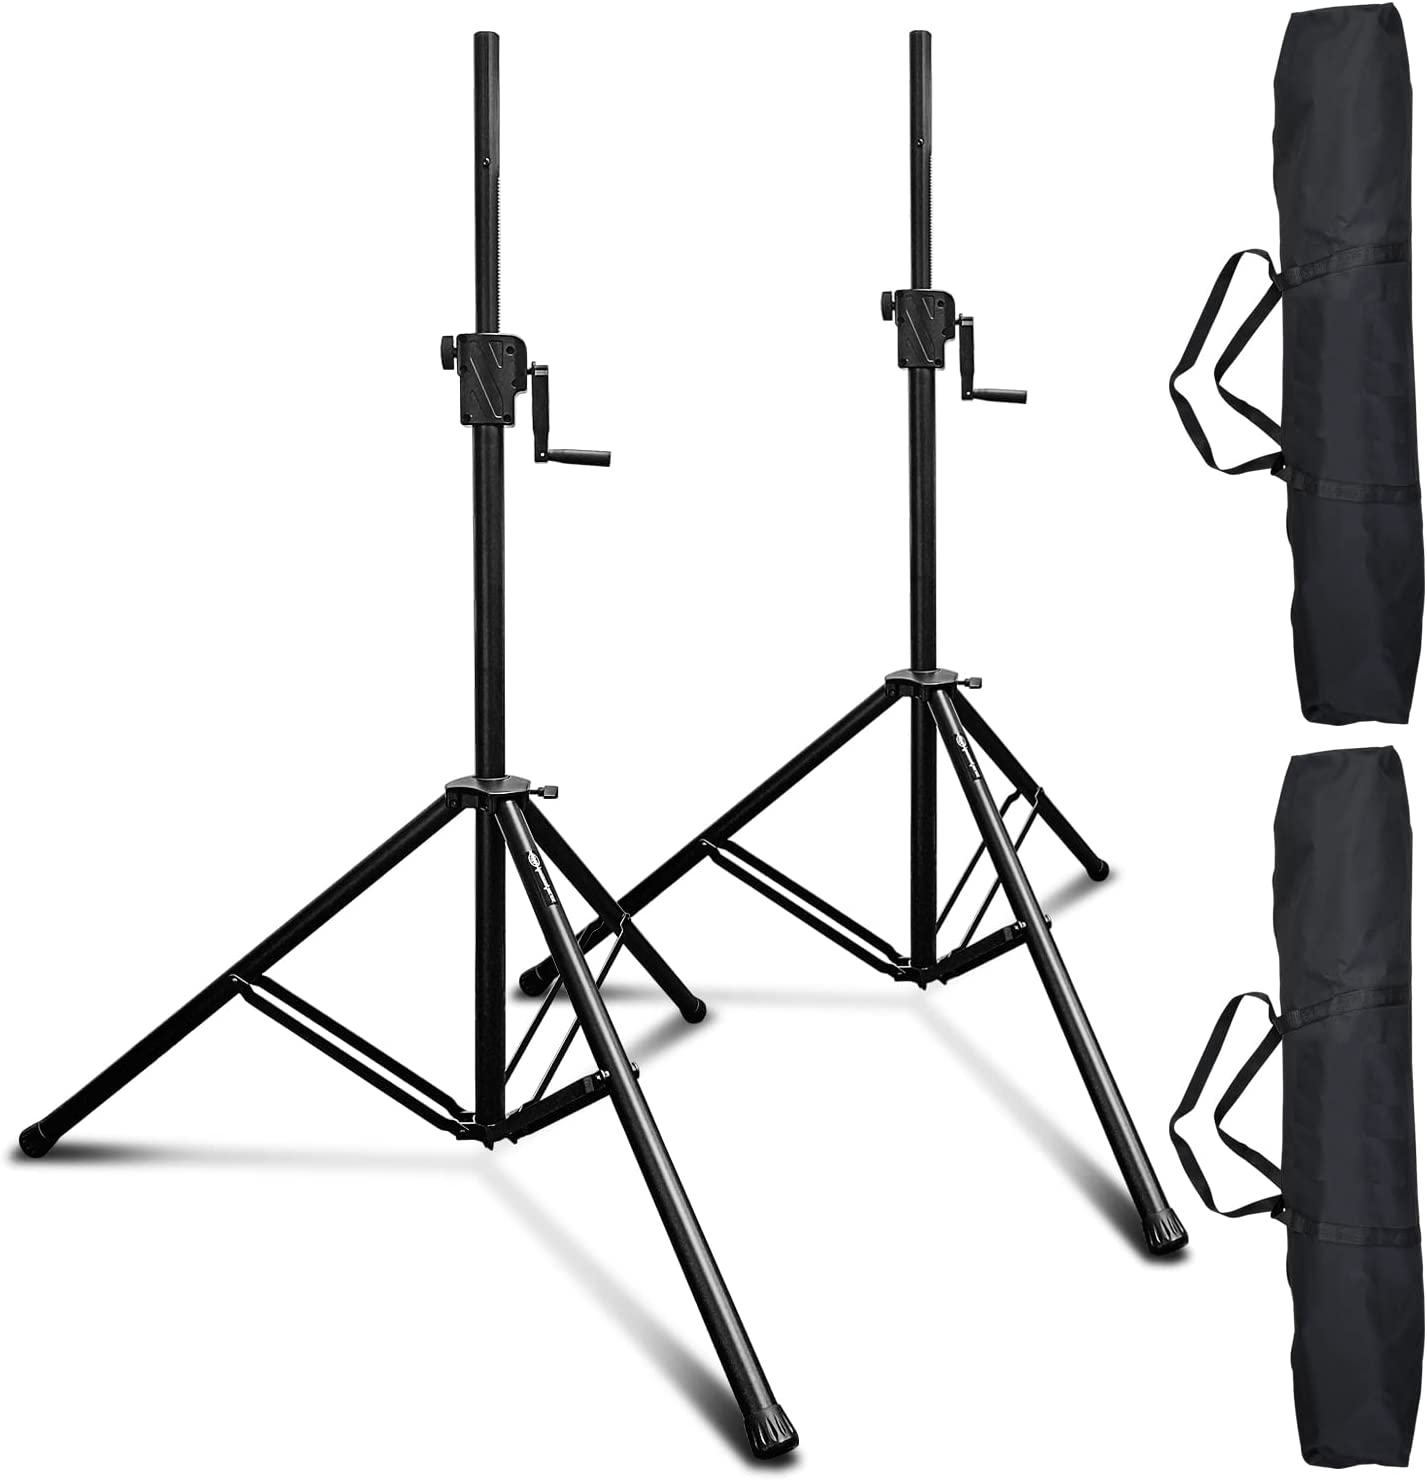 AxcessAbles Heavy-Duty Crank-up DJ Stands with Carry Bag | 175LB Load Capacity per Stand | Crank Up Light Stands | Crank Up DJ Speaker Tripod Stands | Stage Lighting Stands (Crank Stand -2 Pack)